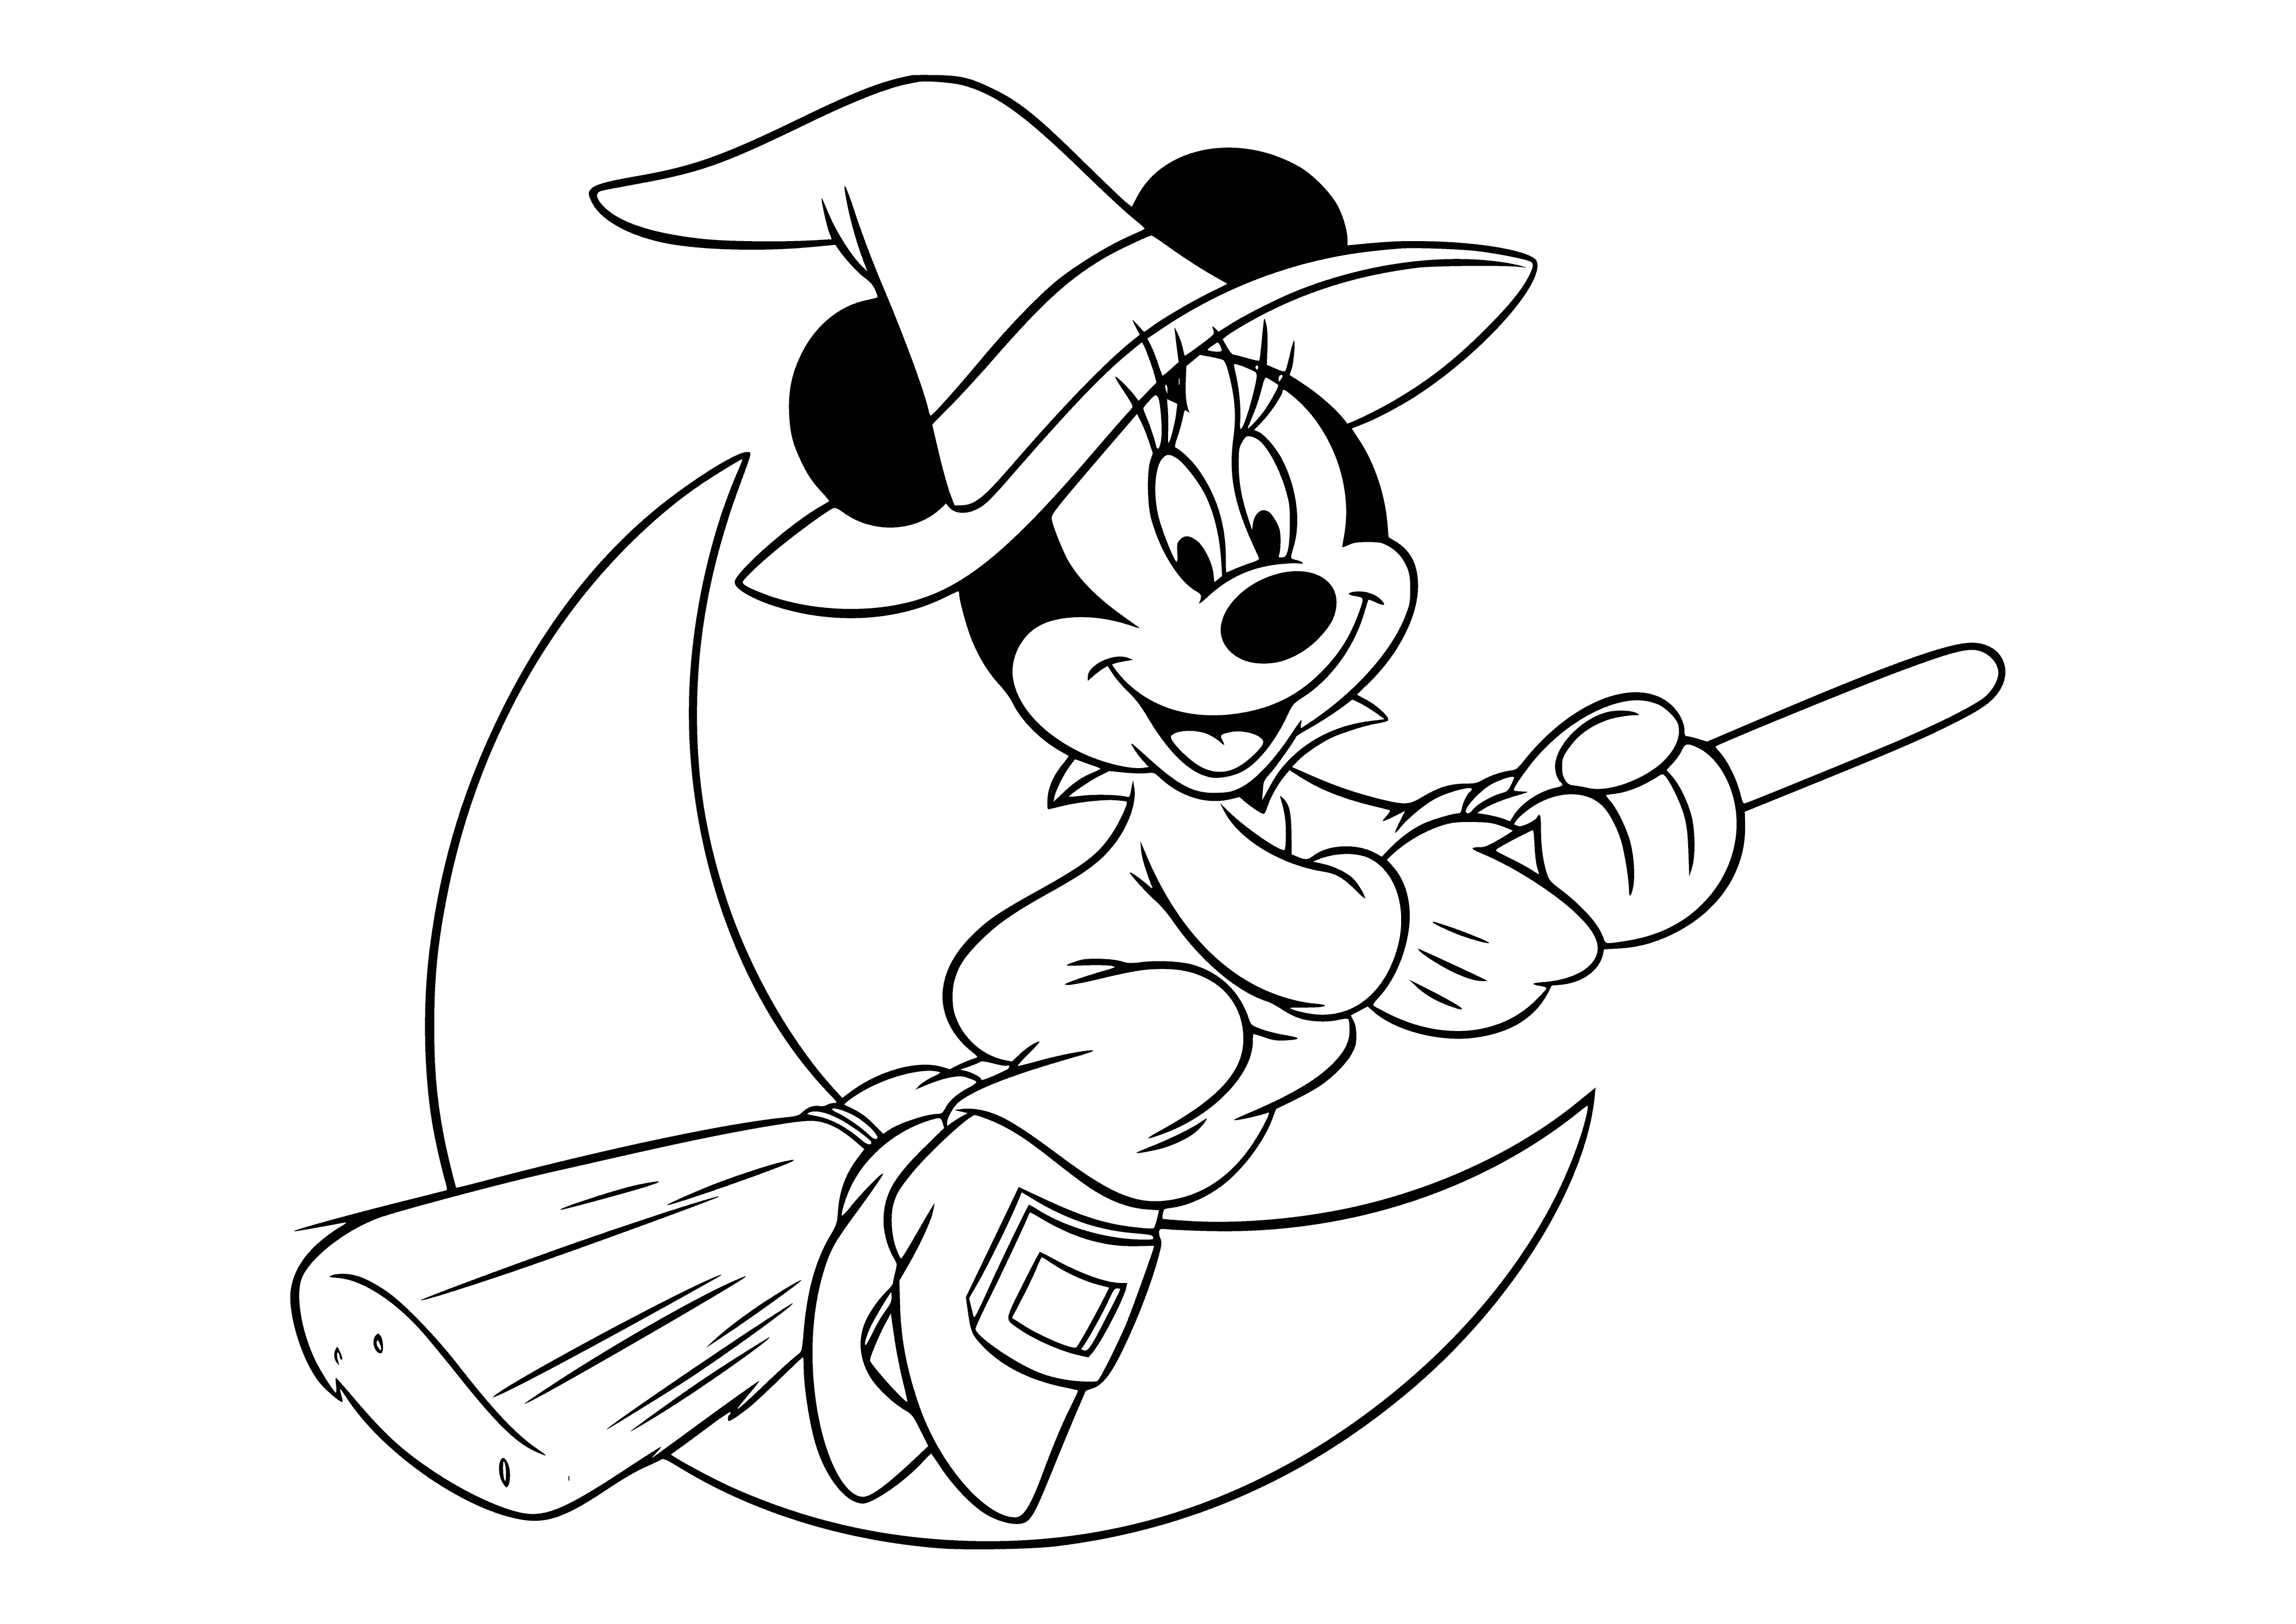 Minnie flies on a broom coloring page